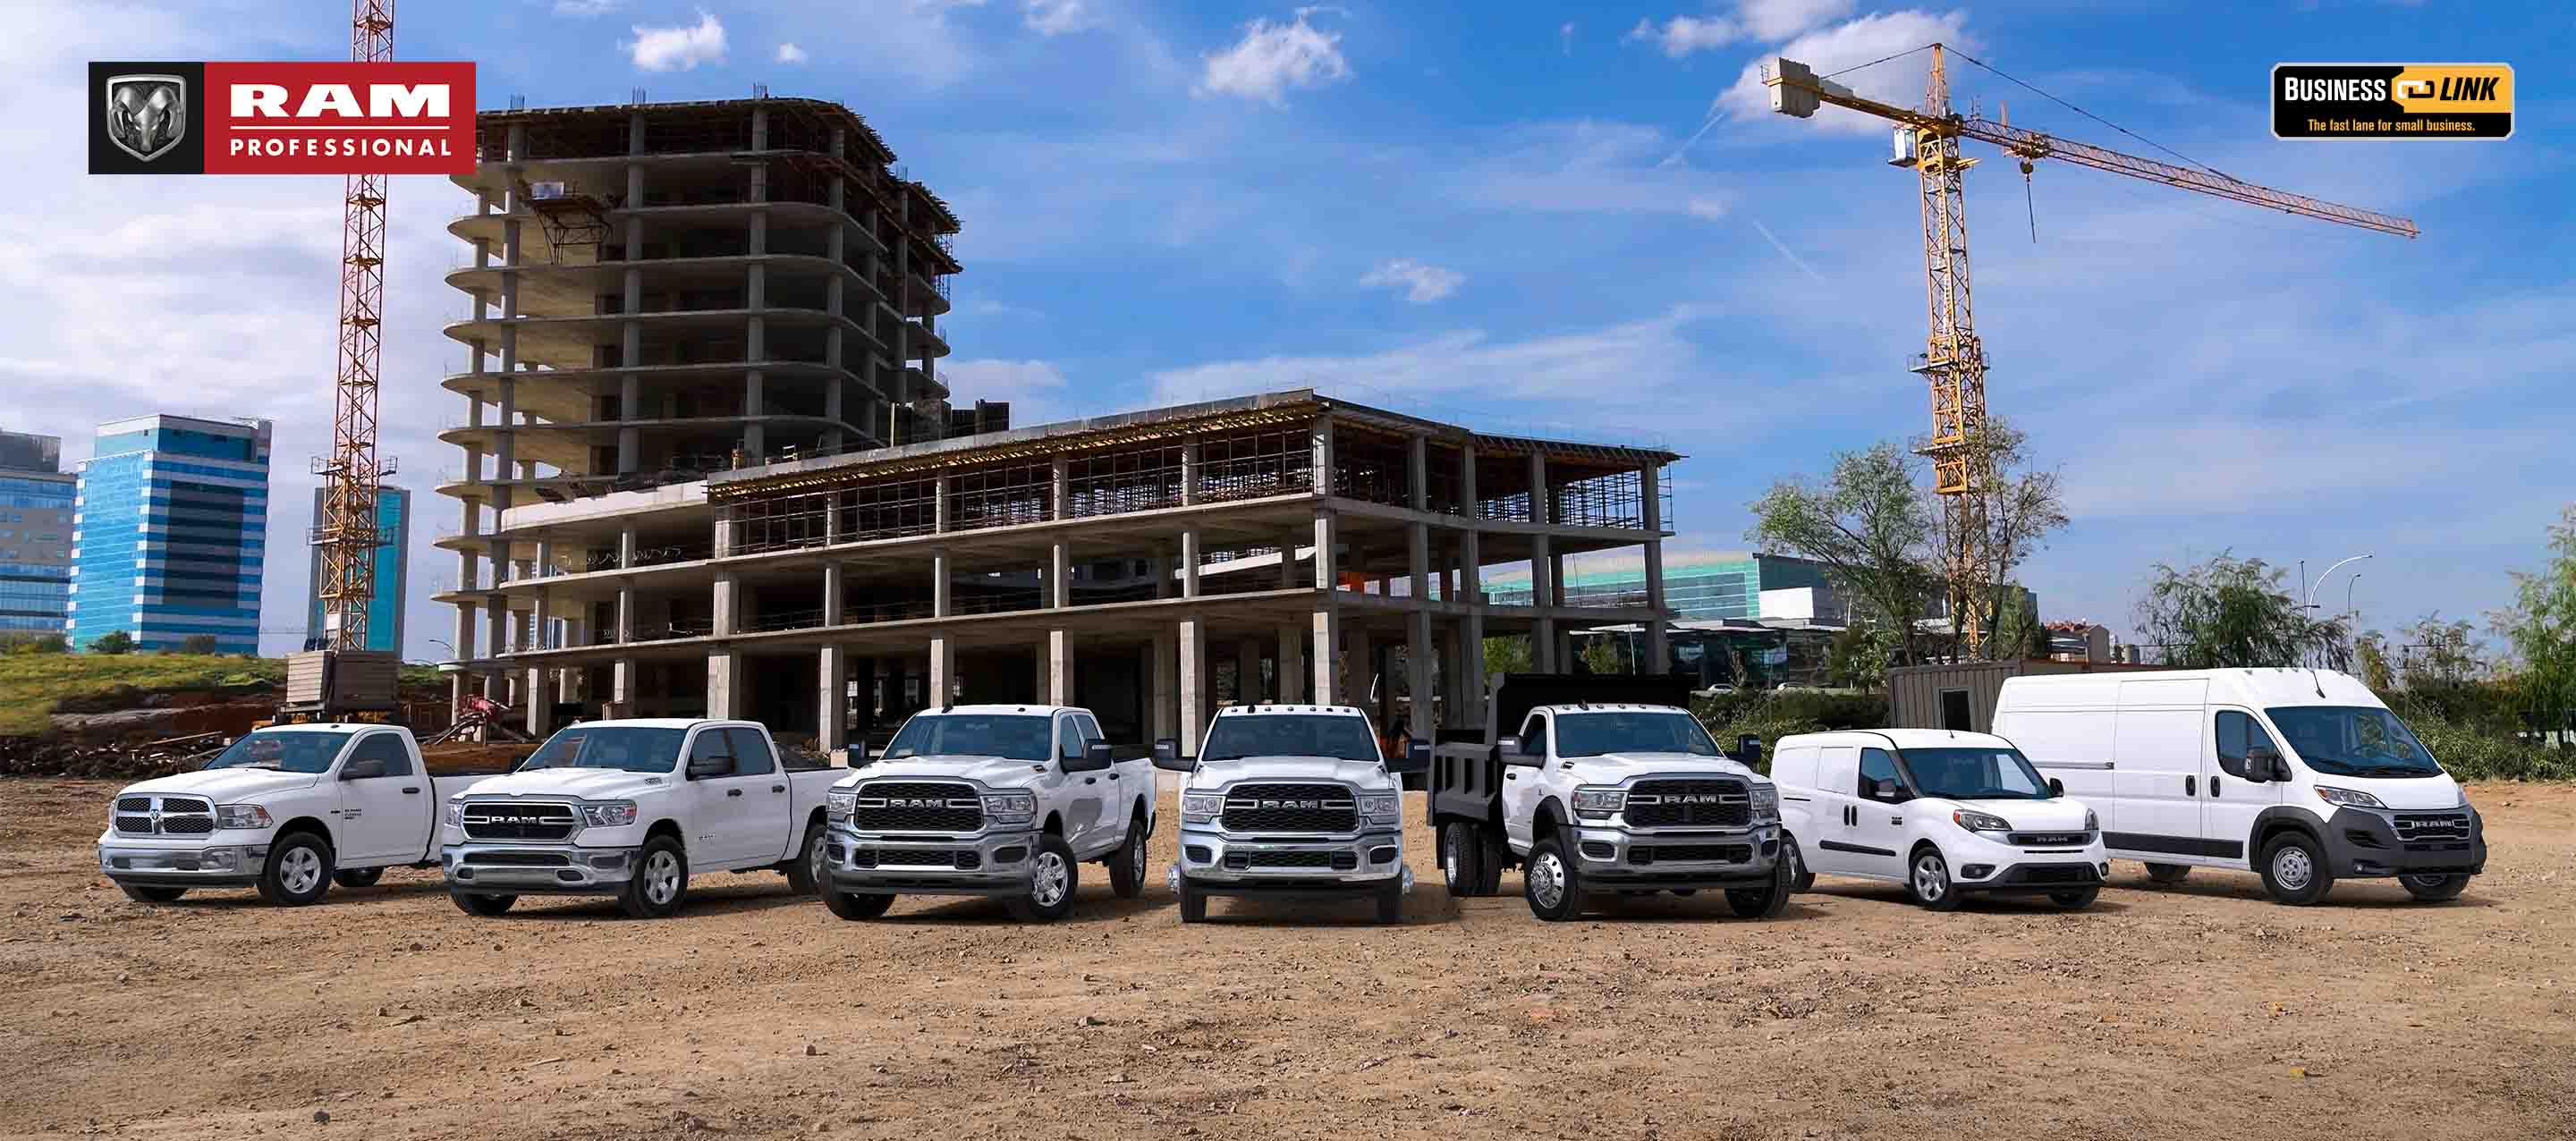 A Ram Brand lineup consisting of, from left to right: a 2023 Ram 1500 Classic Tradesman 4x4 Regular Cab, 2023 Ram 1500 Tradesman 4x4 Crew Cab, 2023 Ram 2500 Tradesman 4x4 Crew Cab, 2023 Ram 3500 Tradesman 4x4 Crew Cab, 2023 Ram 5500 SLT Chassis Cab 4x4 with dump body upfit, 2022 Ram ProMaster City Cargo Van and 2023 Ram ProMaster 3500 Cargo Van High Roof, all in white, parked side-by-side at a construction site. Ram Professional. Business Link: The fast lane for small business.